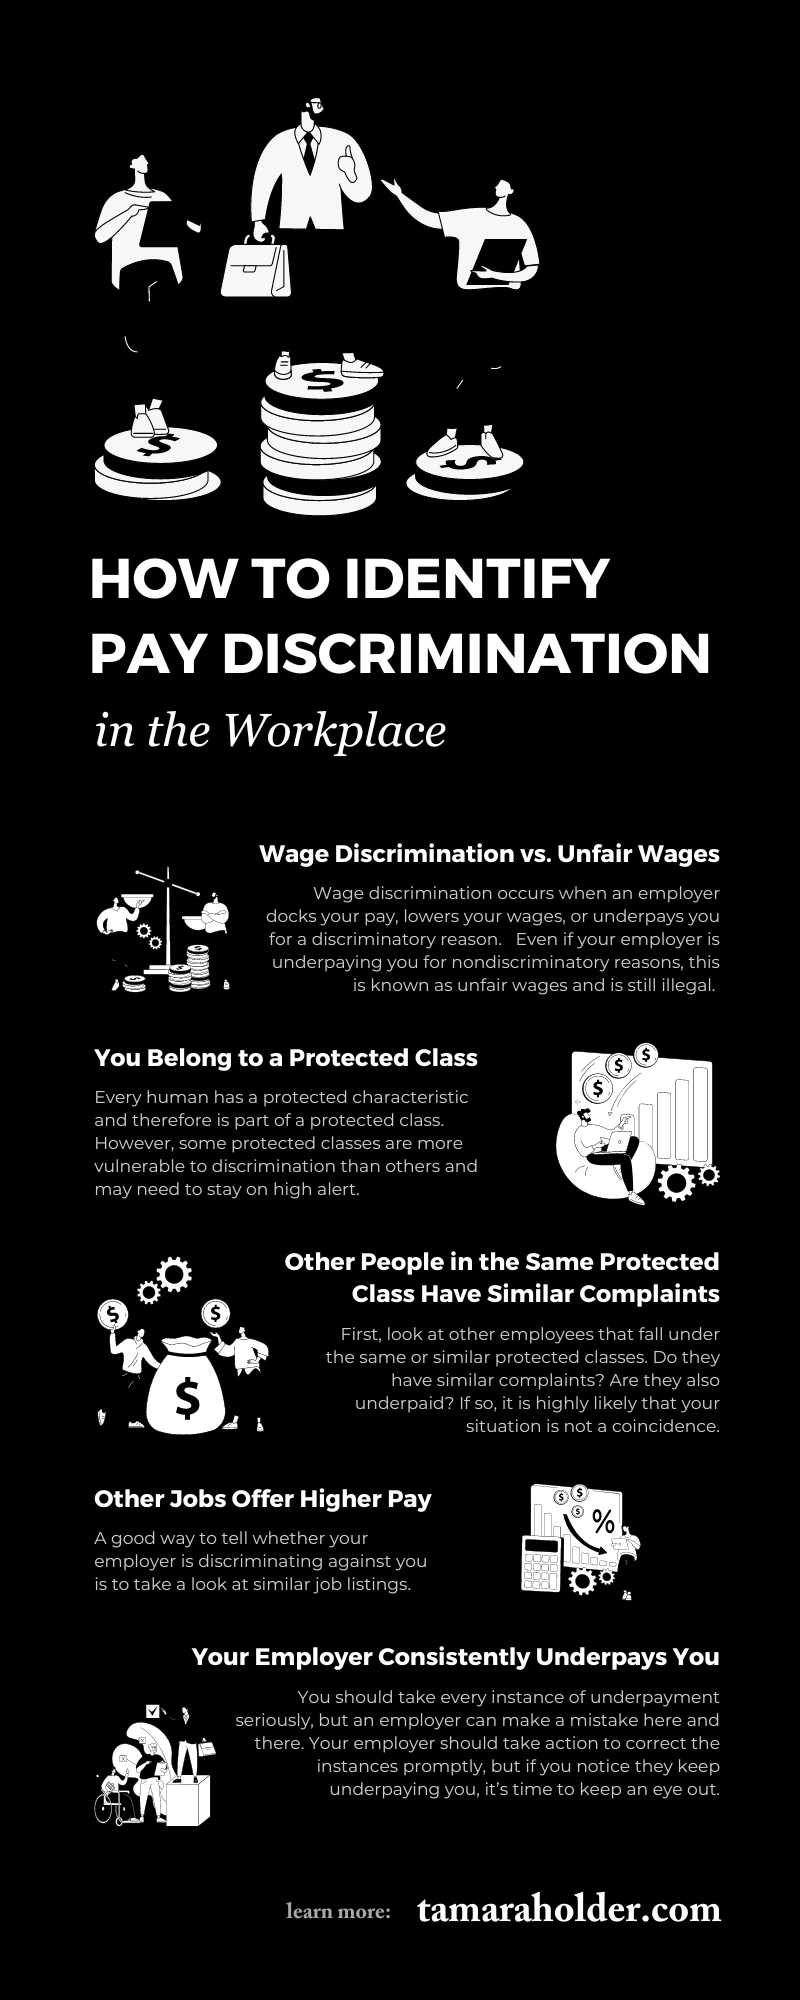 How To Identify Pay Discrimination in the Workplace